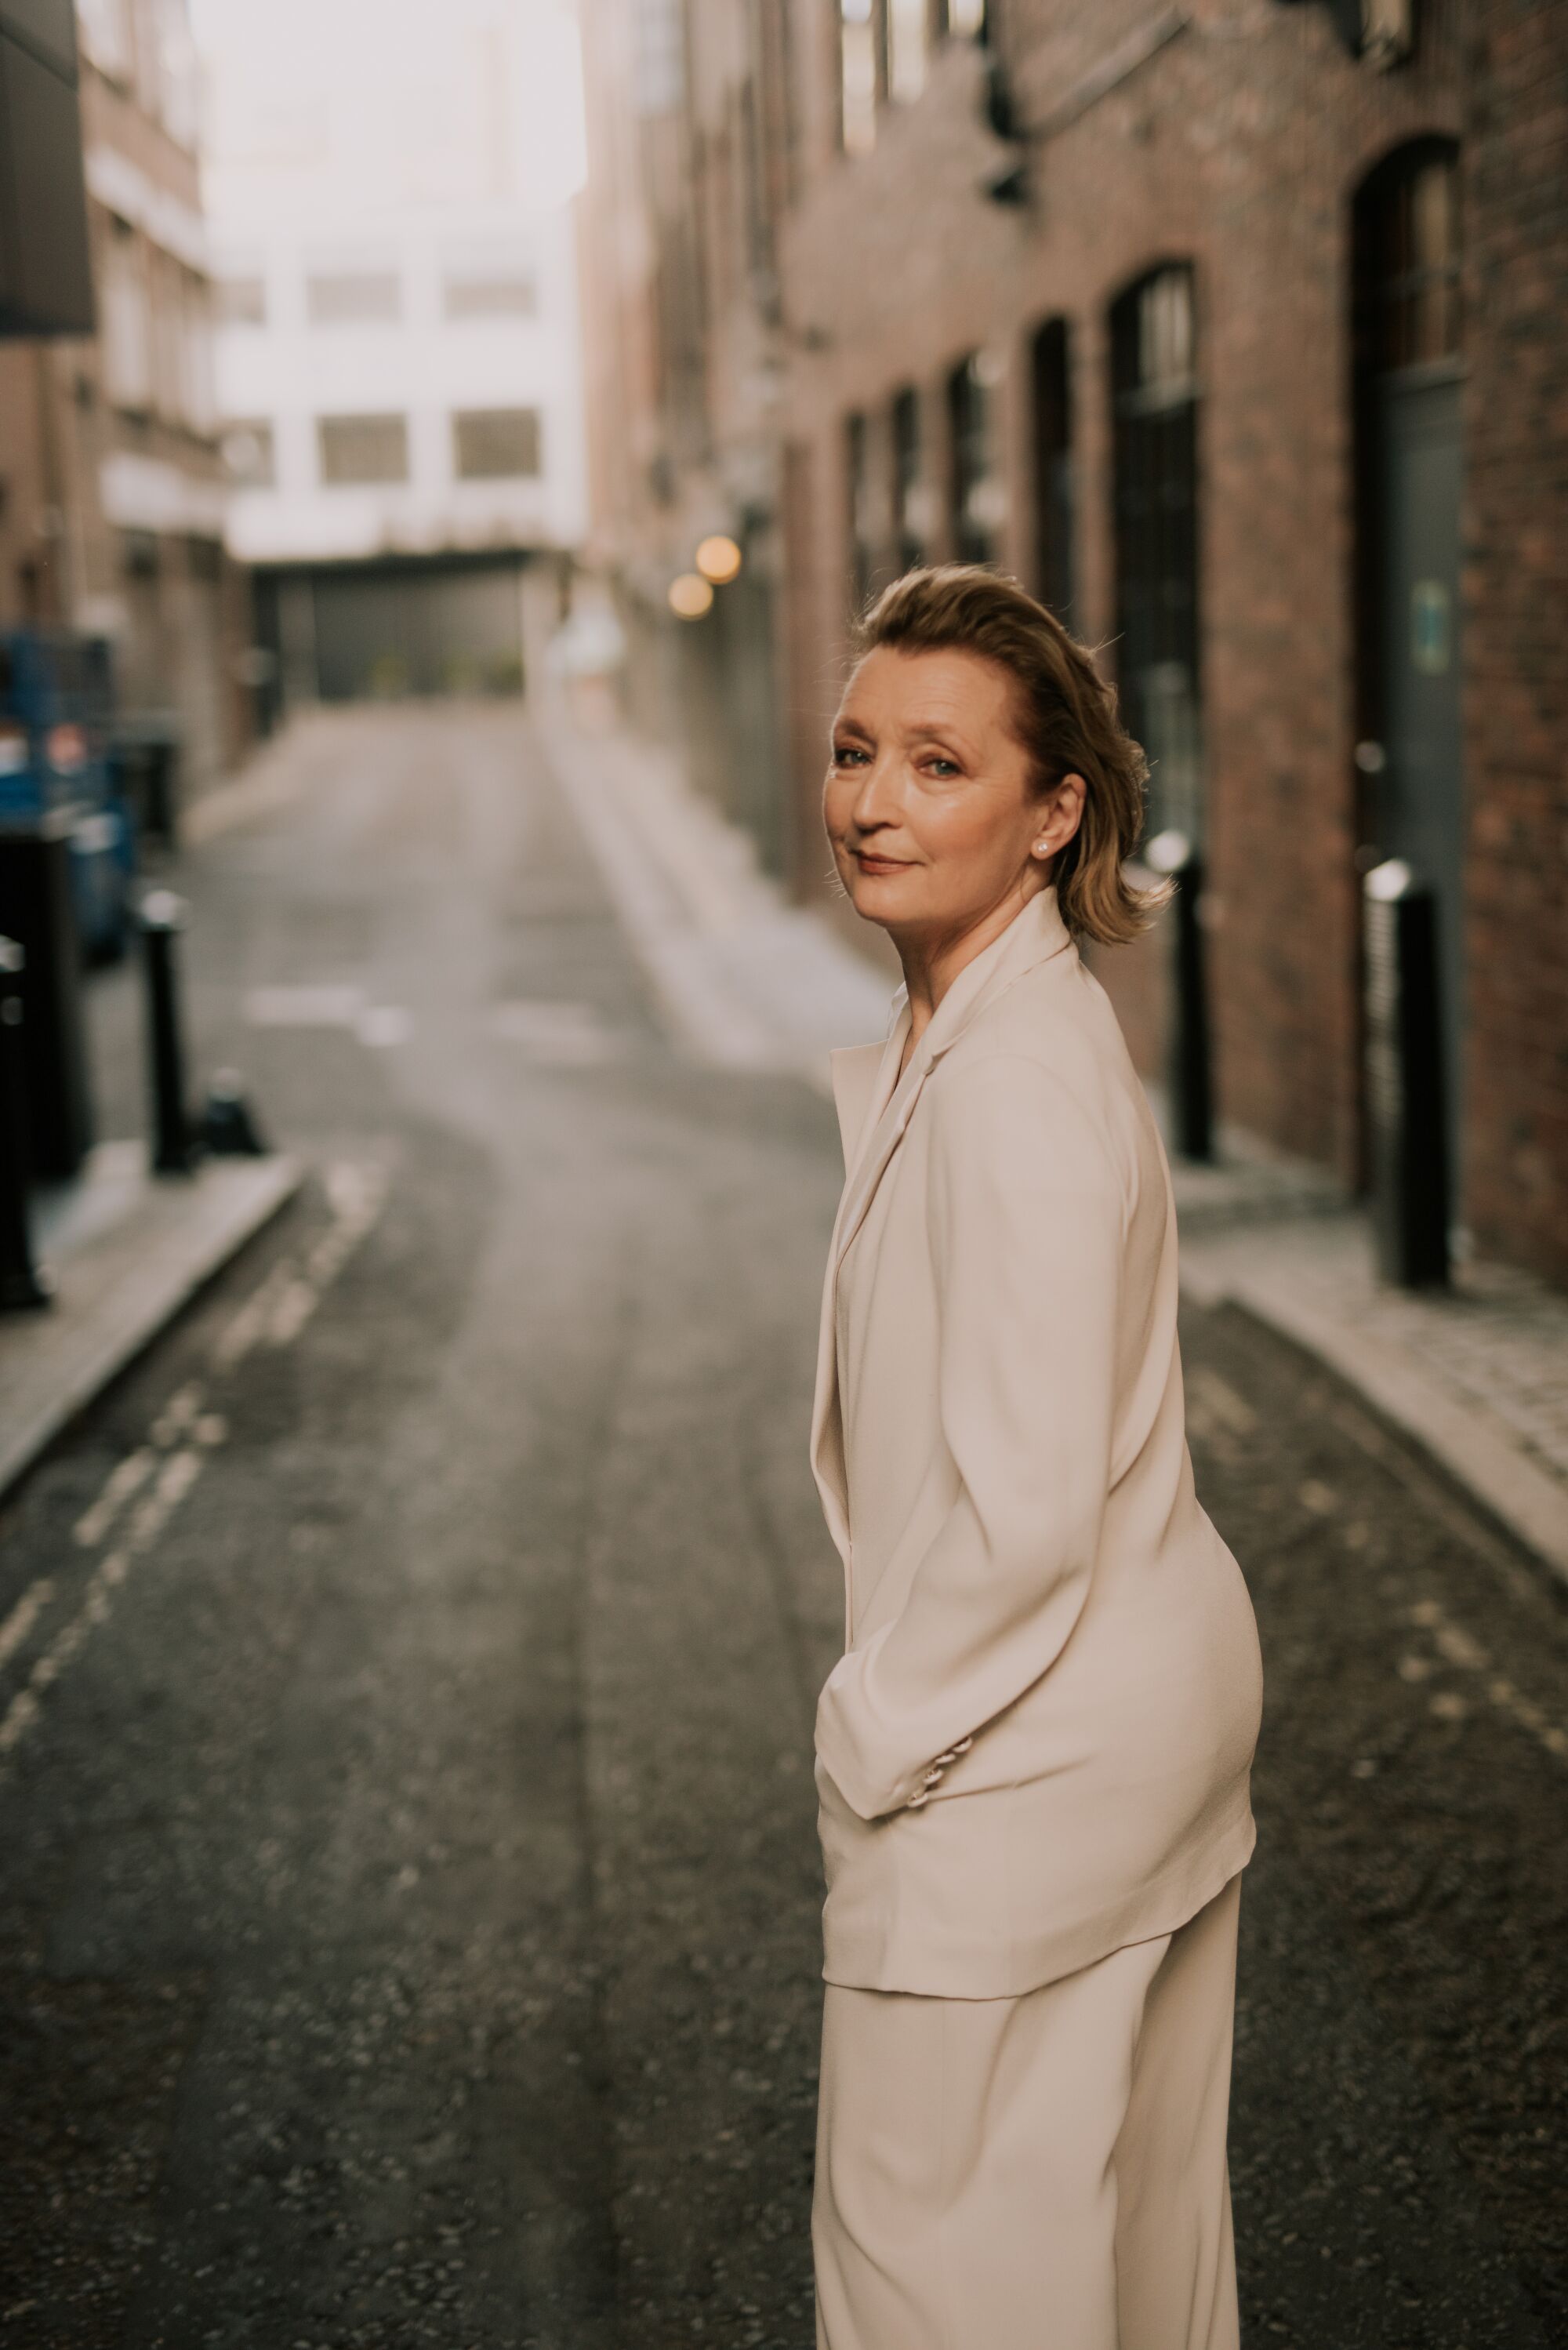 A woman in a white suit walks on a small road looking back